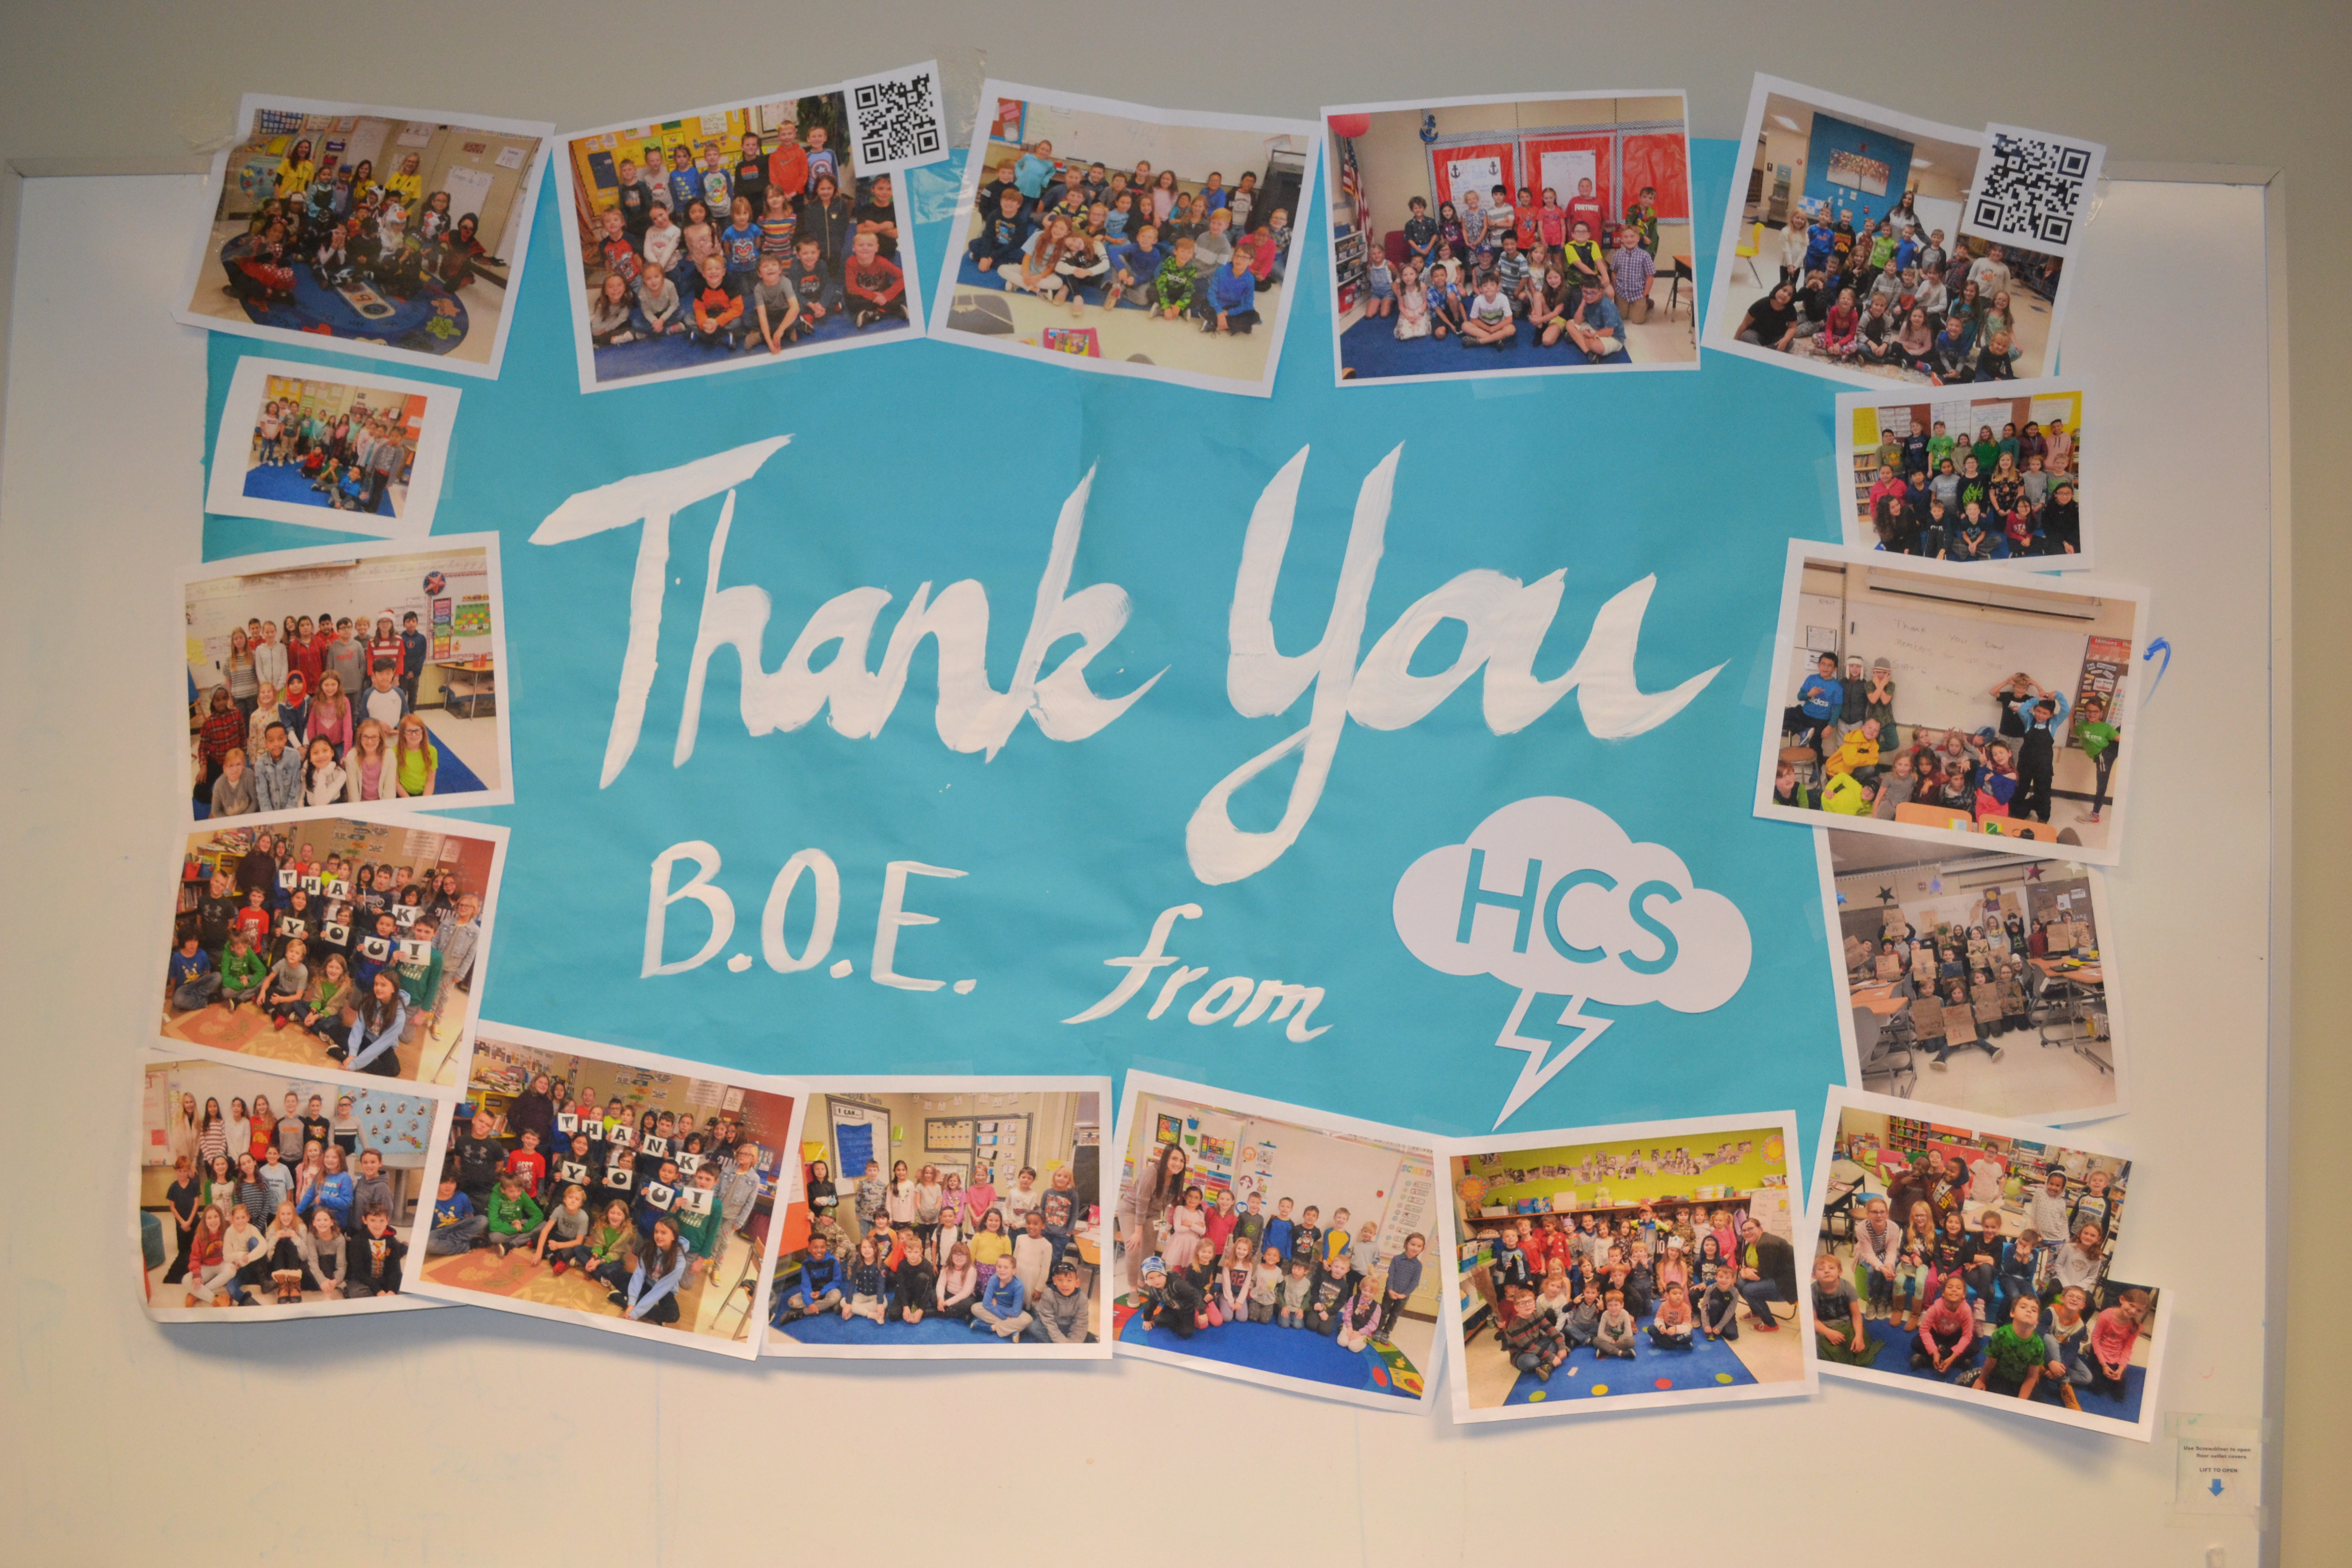 <p>A thank you to the BOE from HCS</p>
